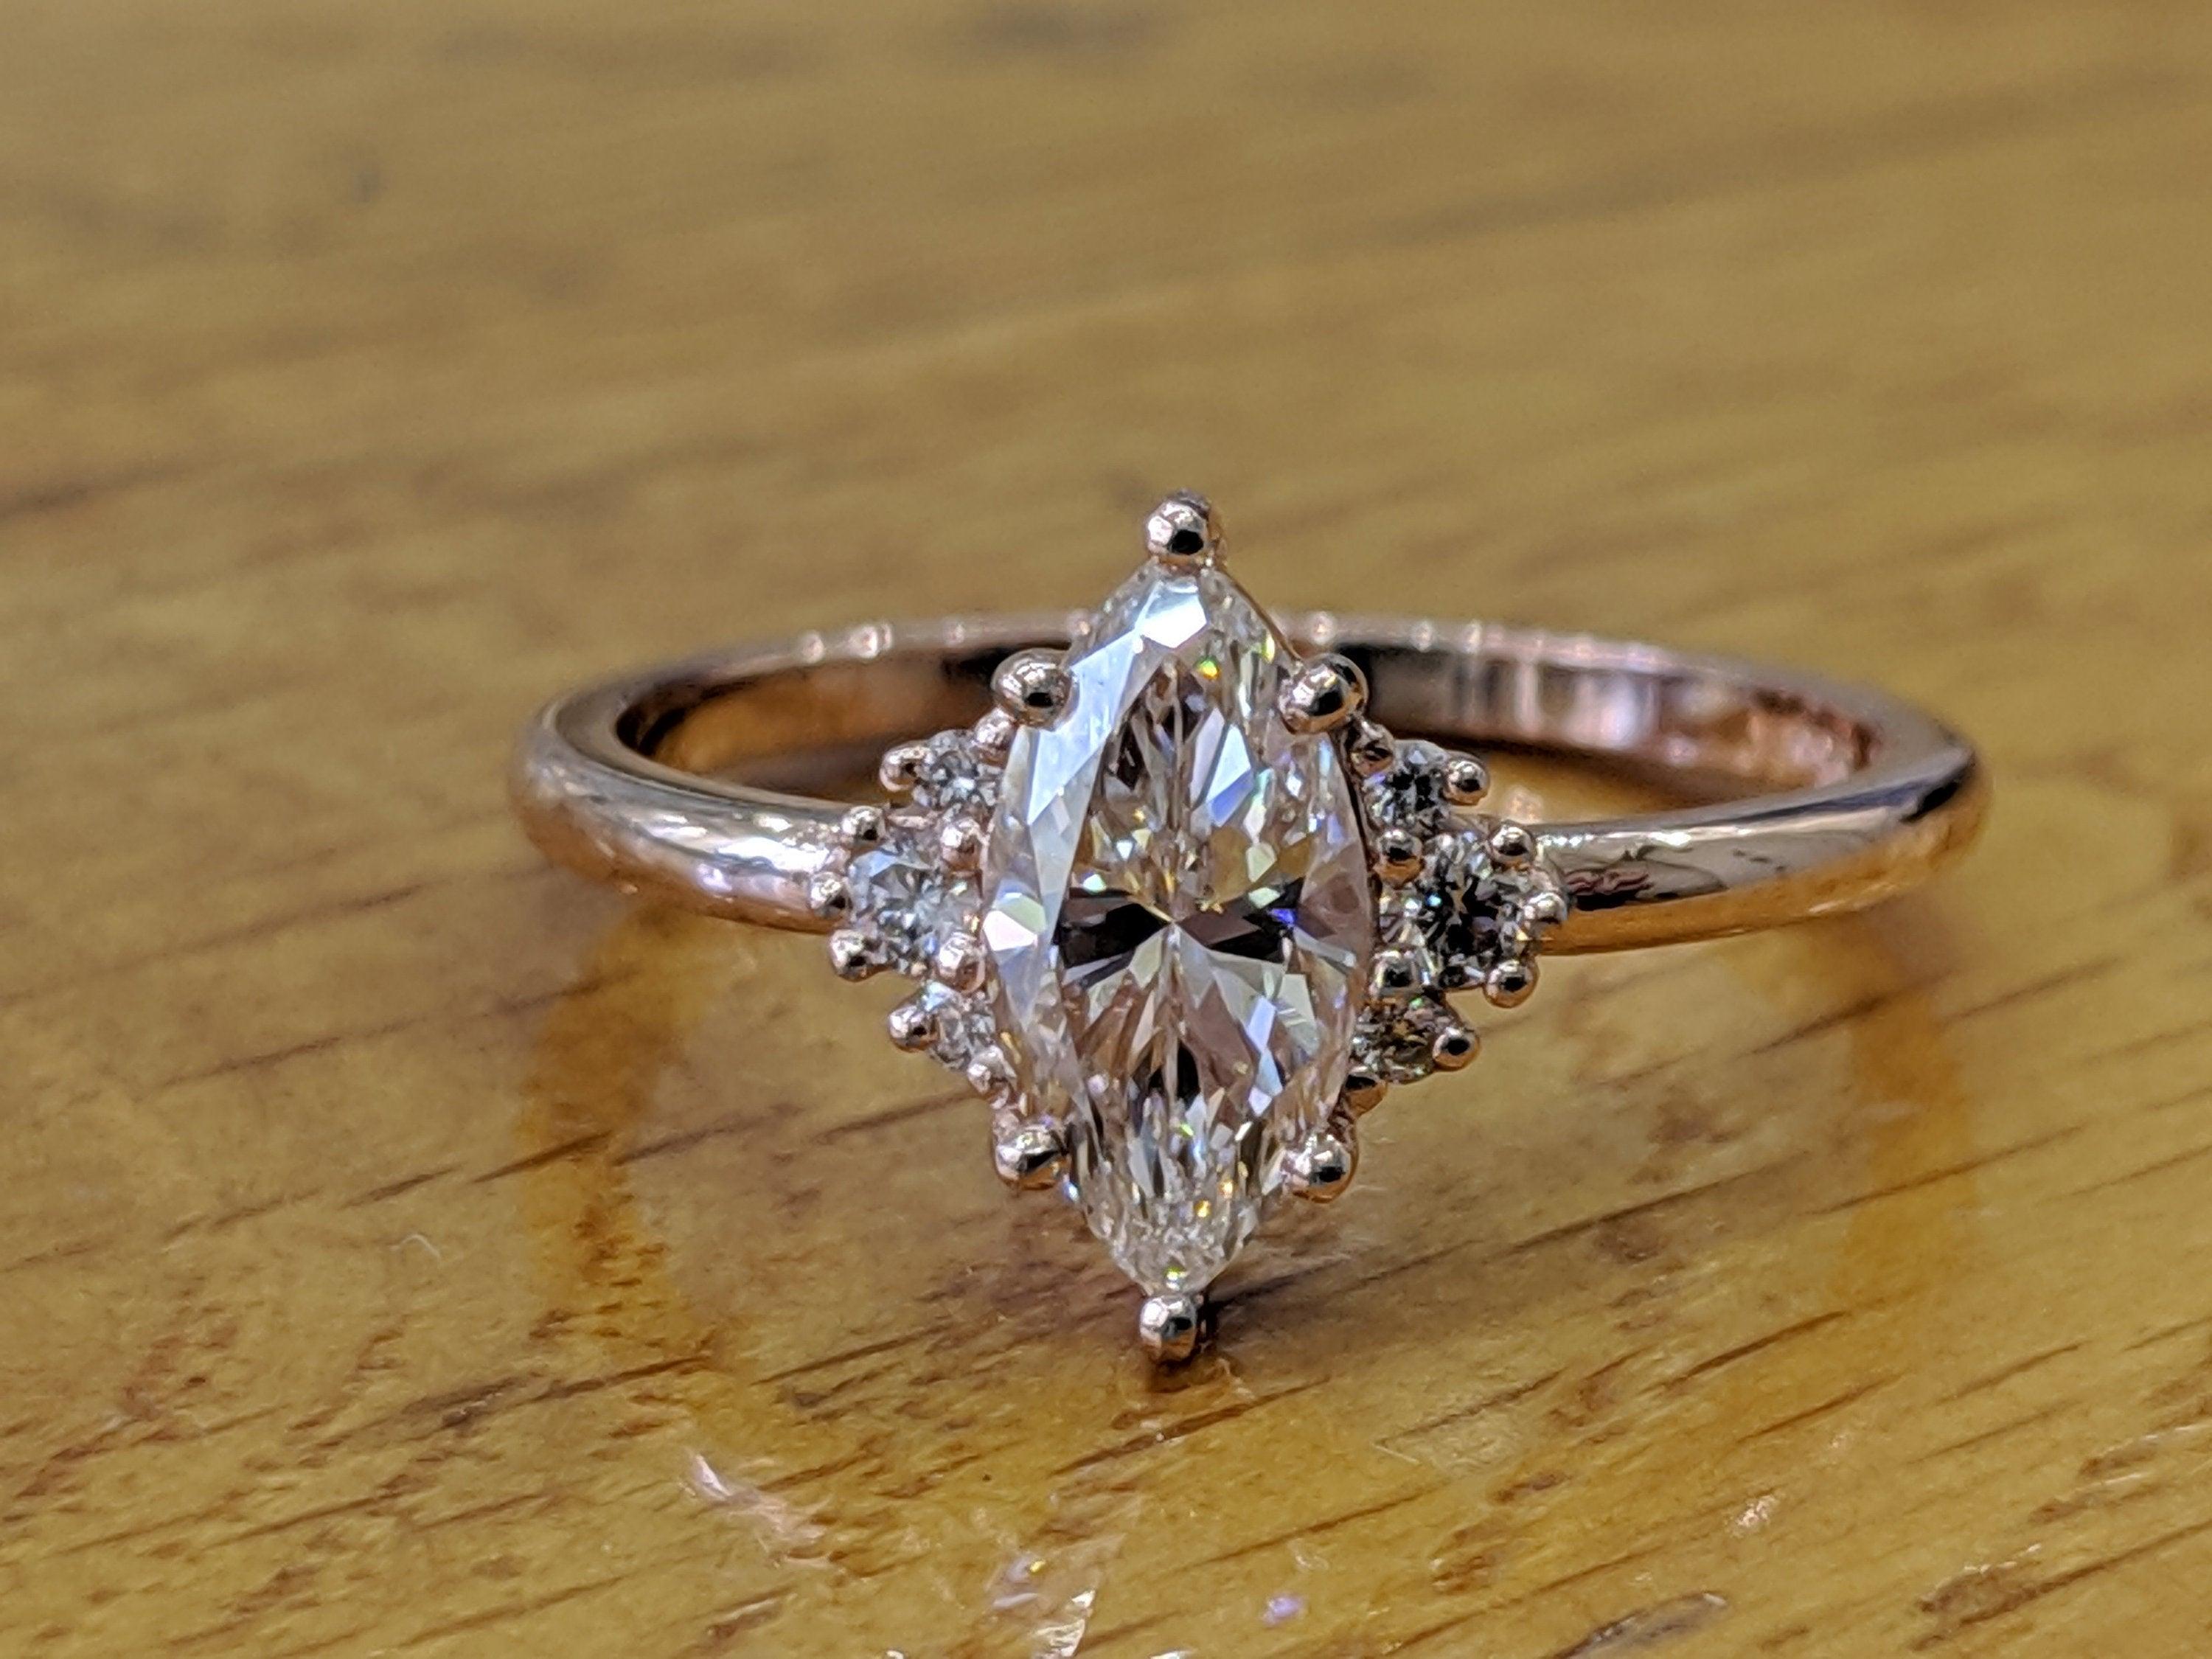 1/2 Carat Marquise Diamond Ring, Marquise Cut Engagement Ring, Marquise Engagement Ring, Victorian Engagement Ring, Victorian Diamond Ring
 
 Main Stone Name: Natural Earth Mined Diamond 
 Main Stone Weight: 0.50 ct.
 Main Stone Clarity: SI1
 Main